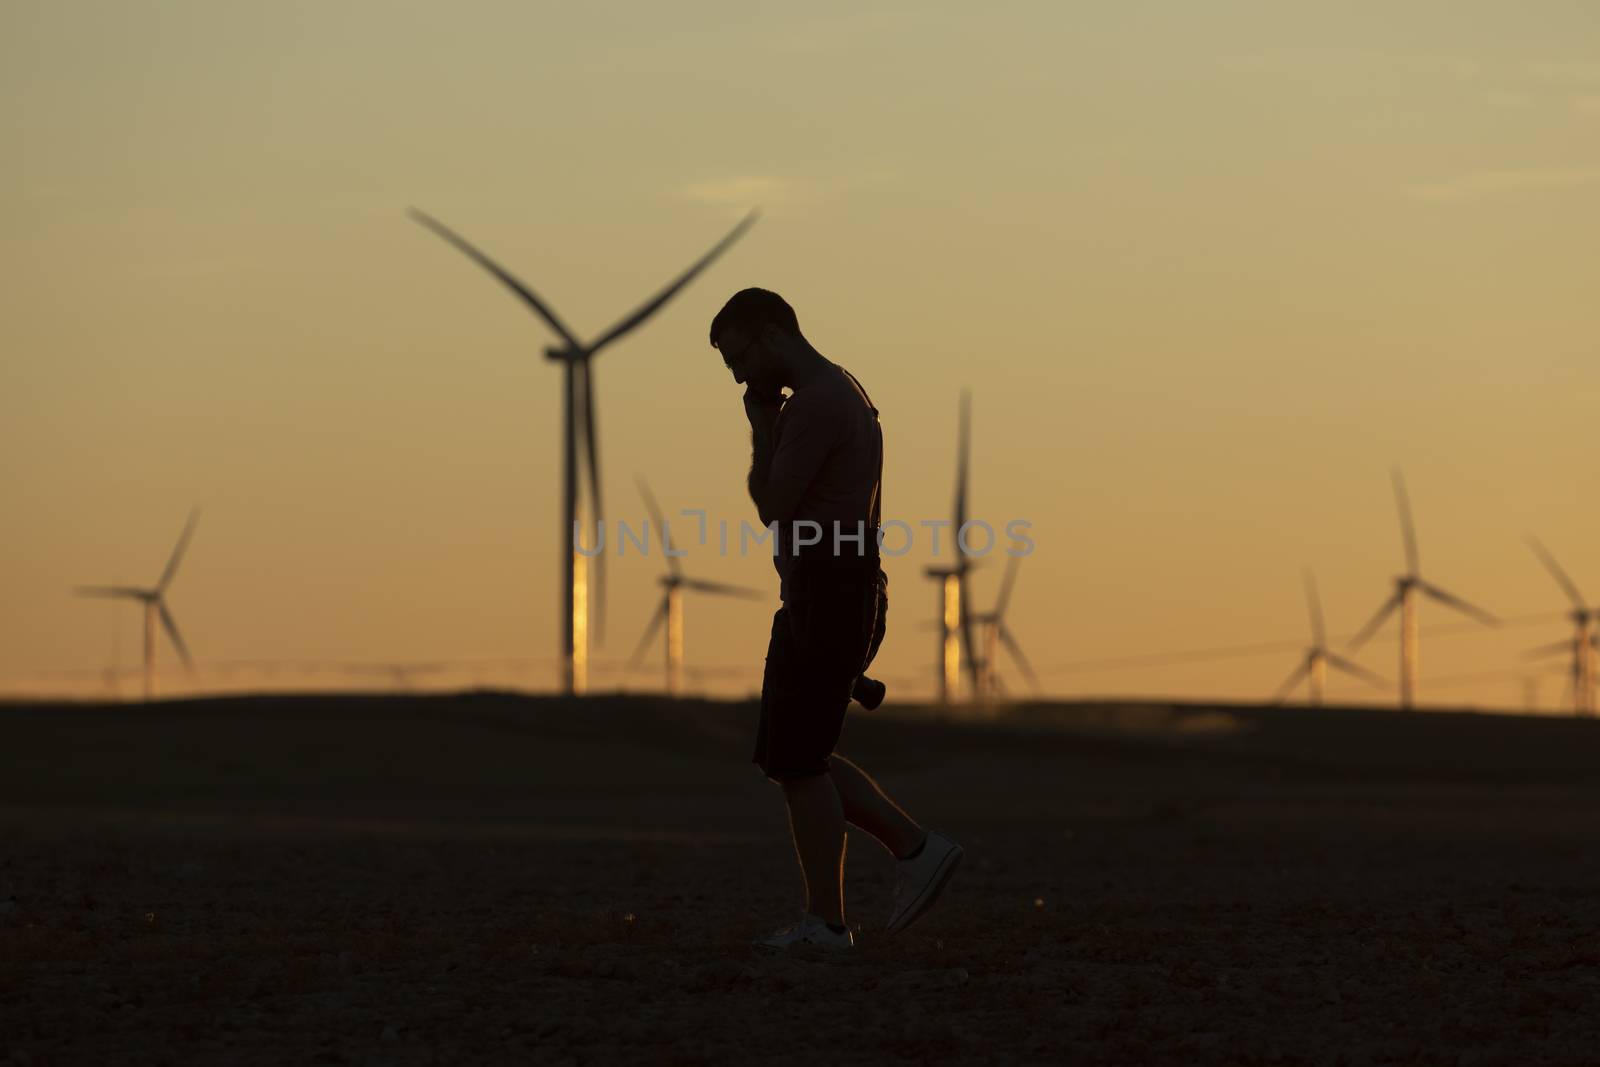 A man walks talking on the phone in the countryside at sunset, after taking pictures of distant wind turbines, on the horizon.